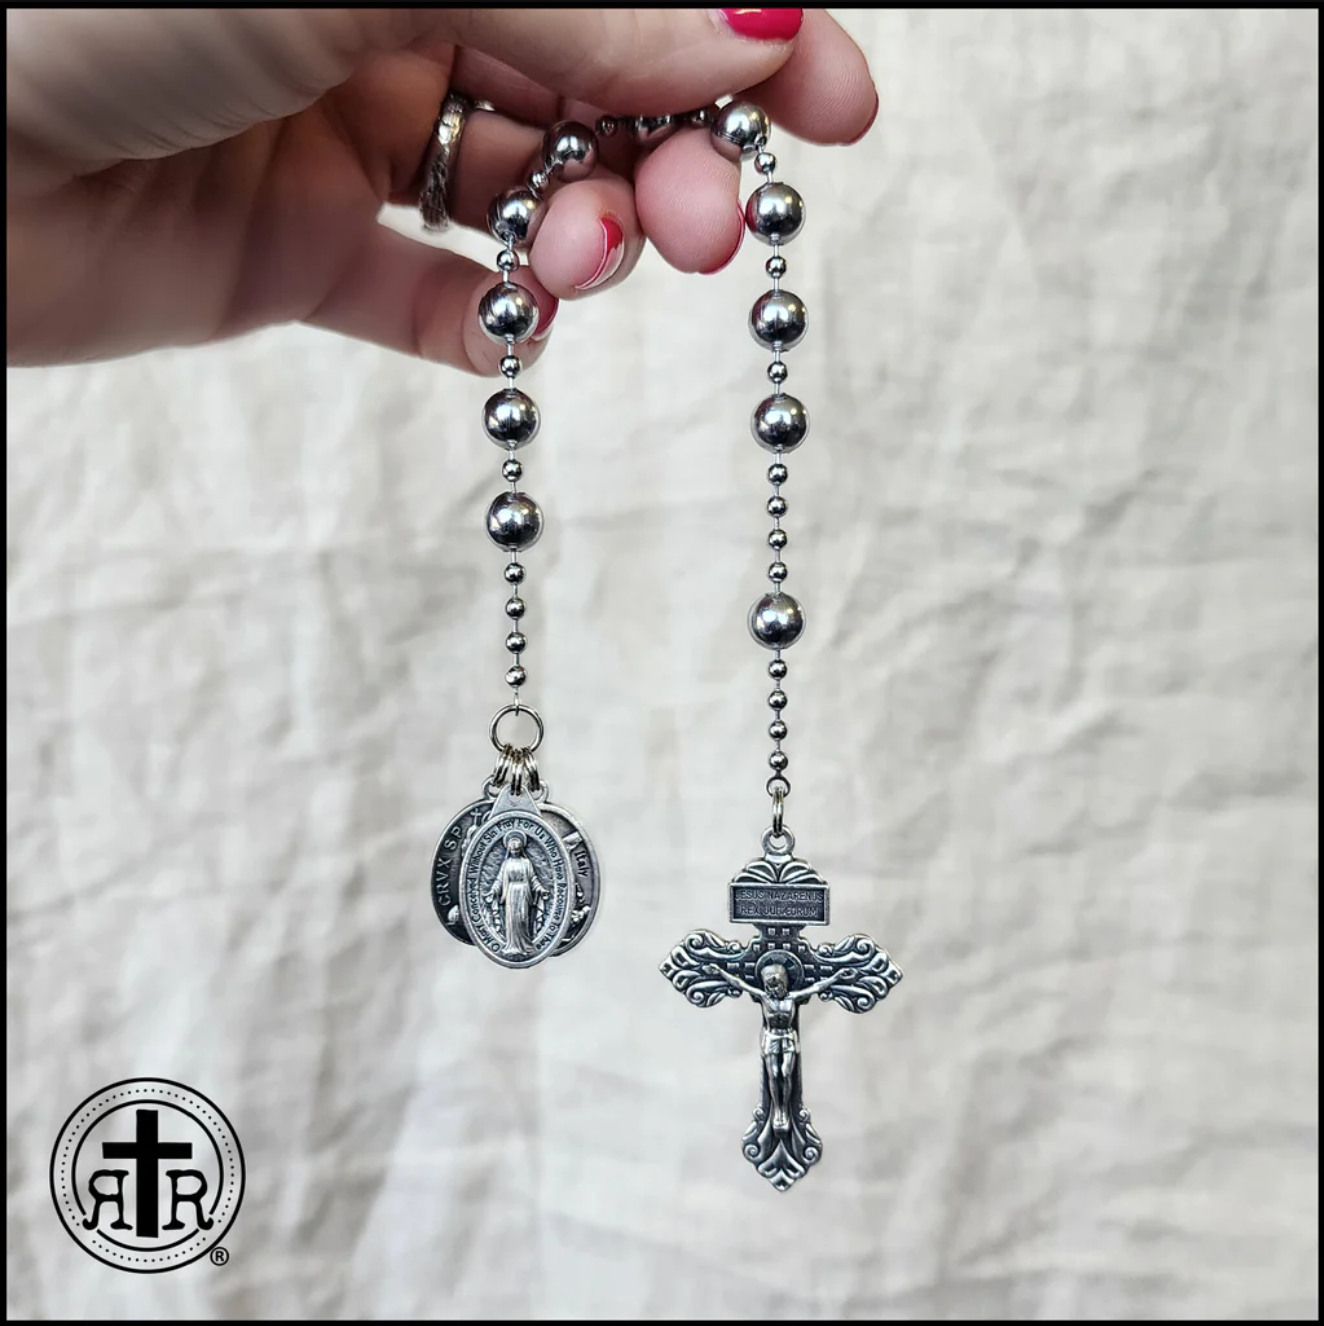 New Rosary Arrivals